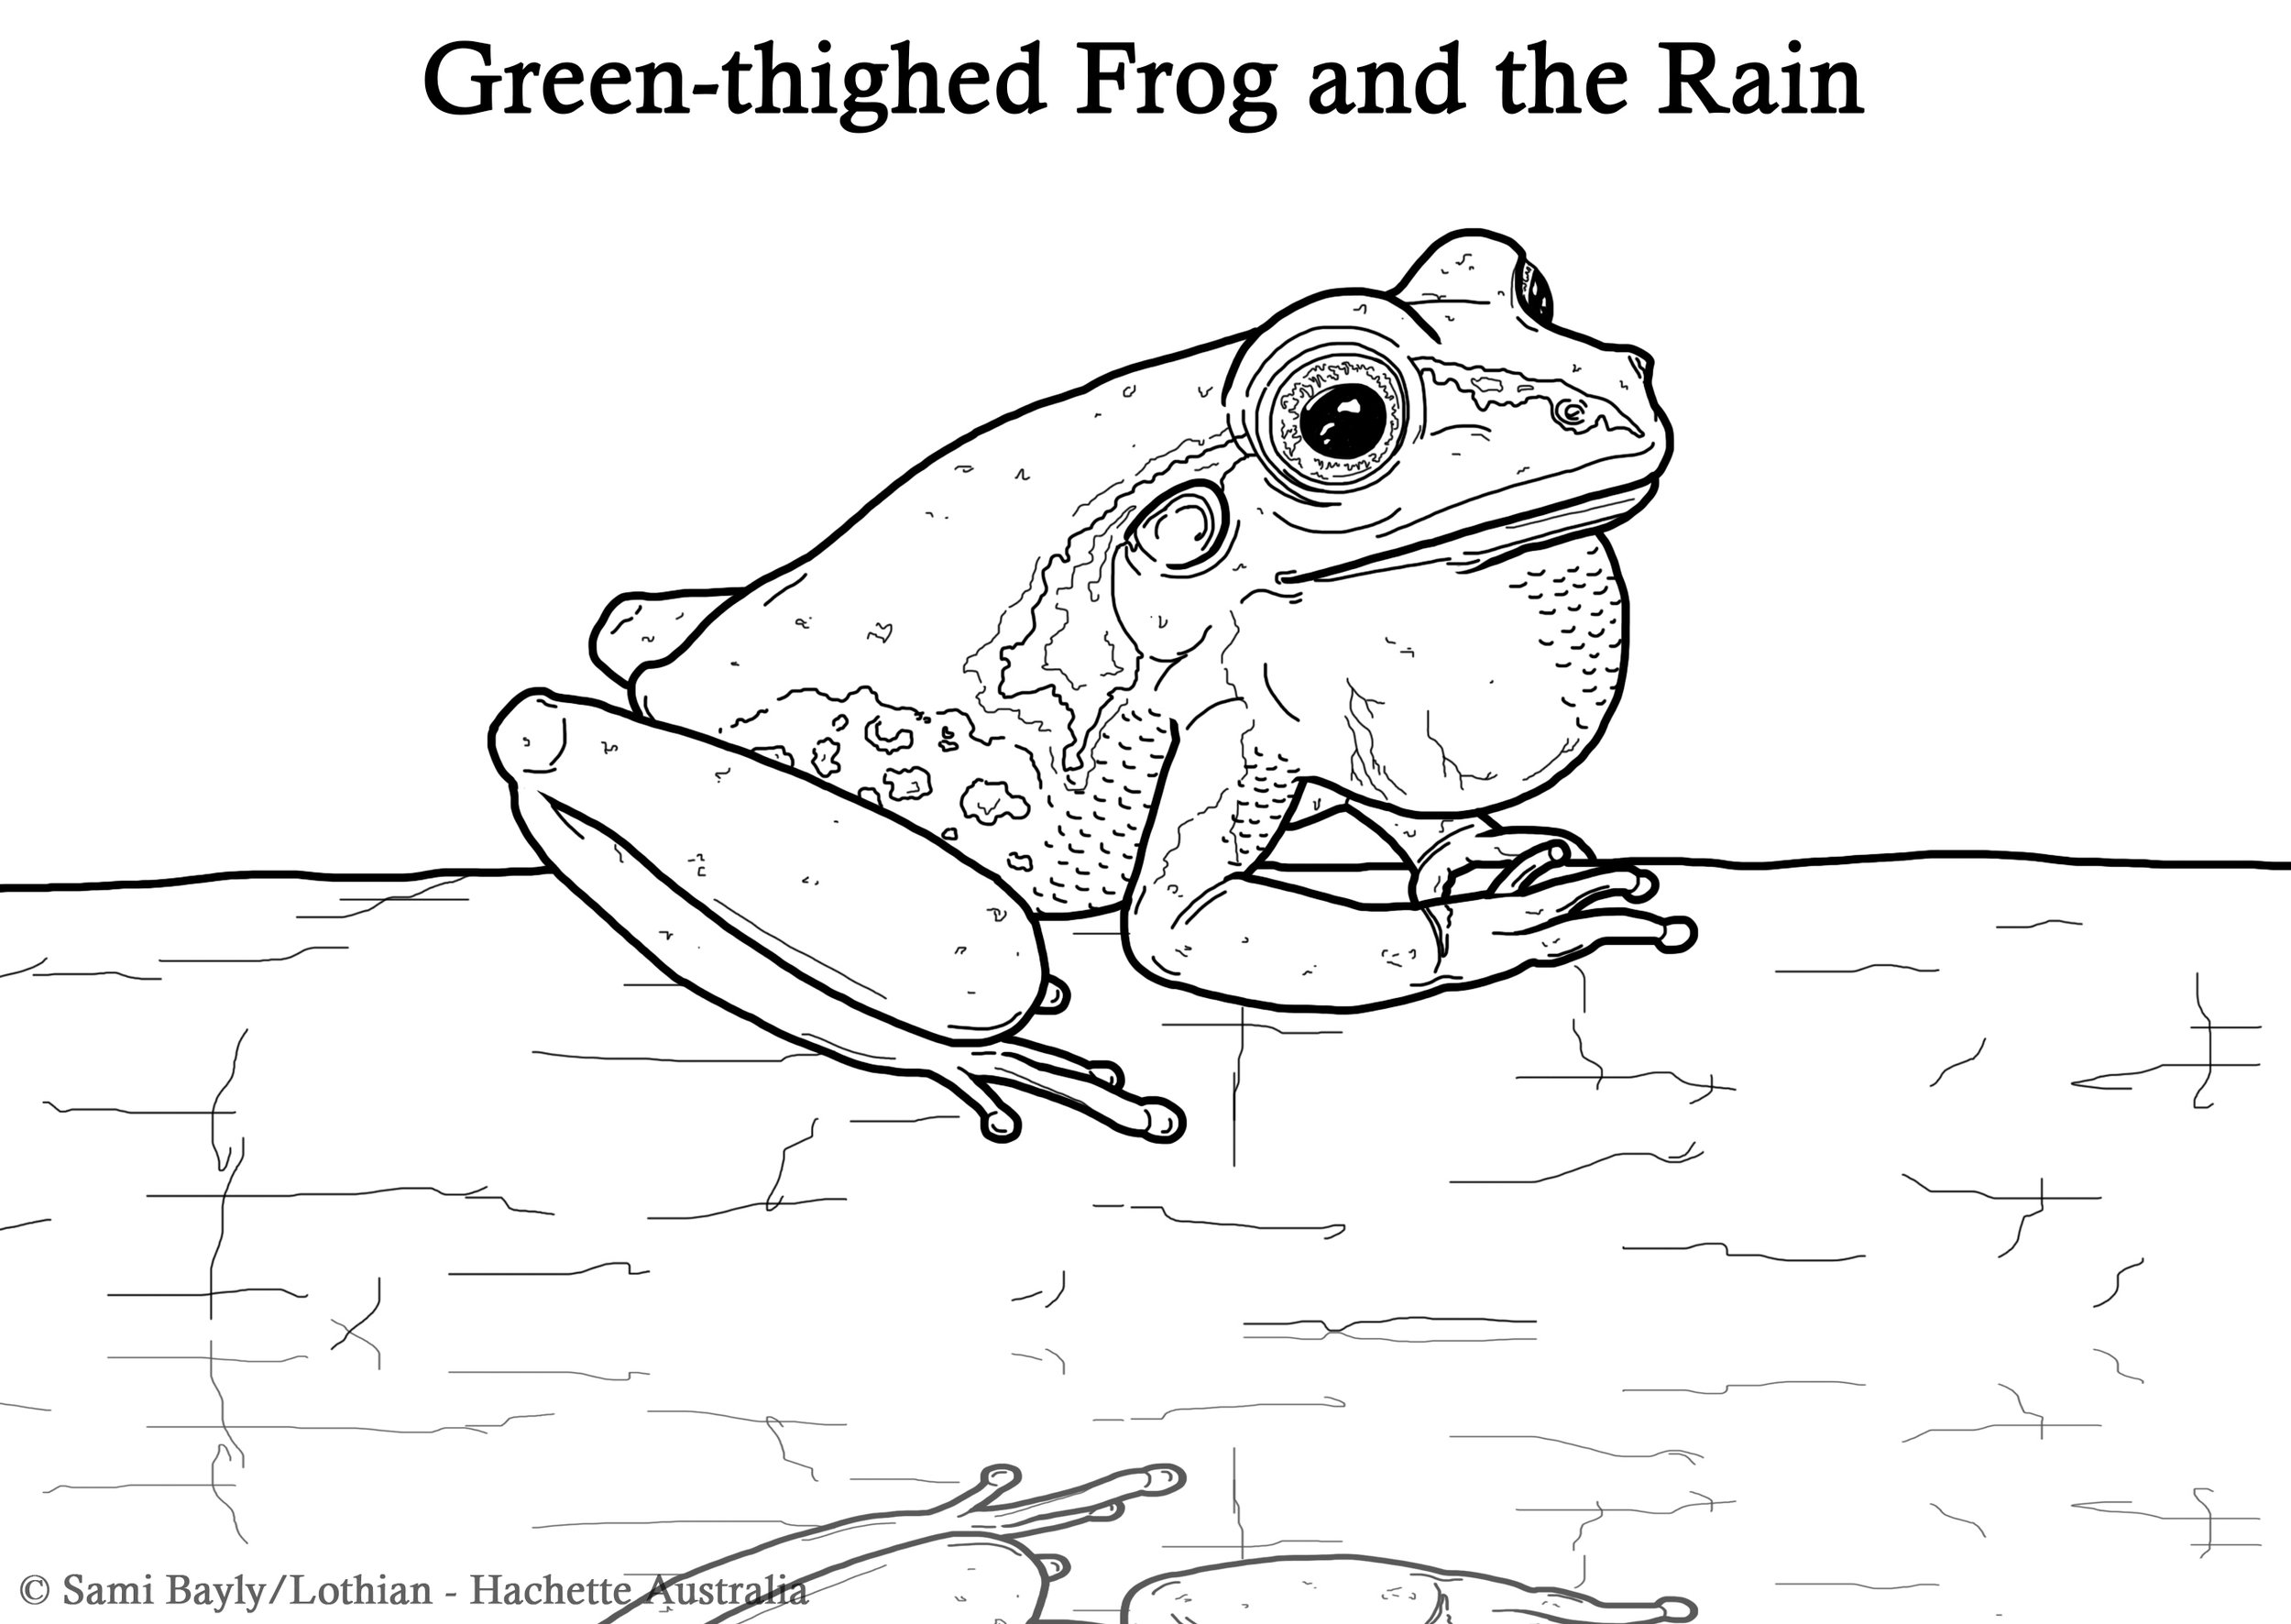 Green-thighed Frog and the Rain Line Drawing.jpg